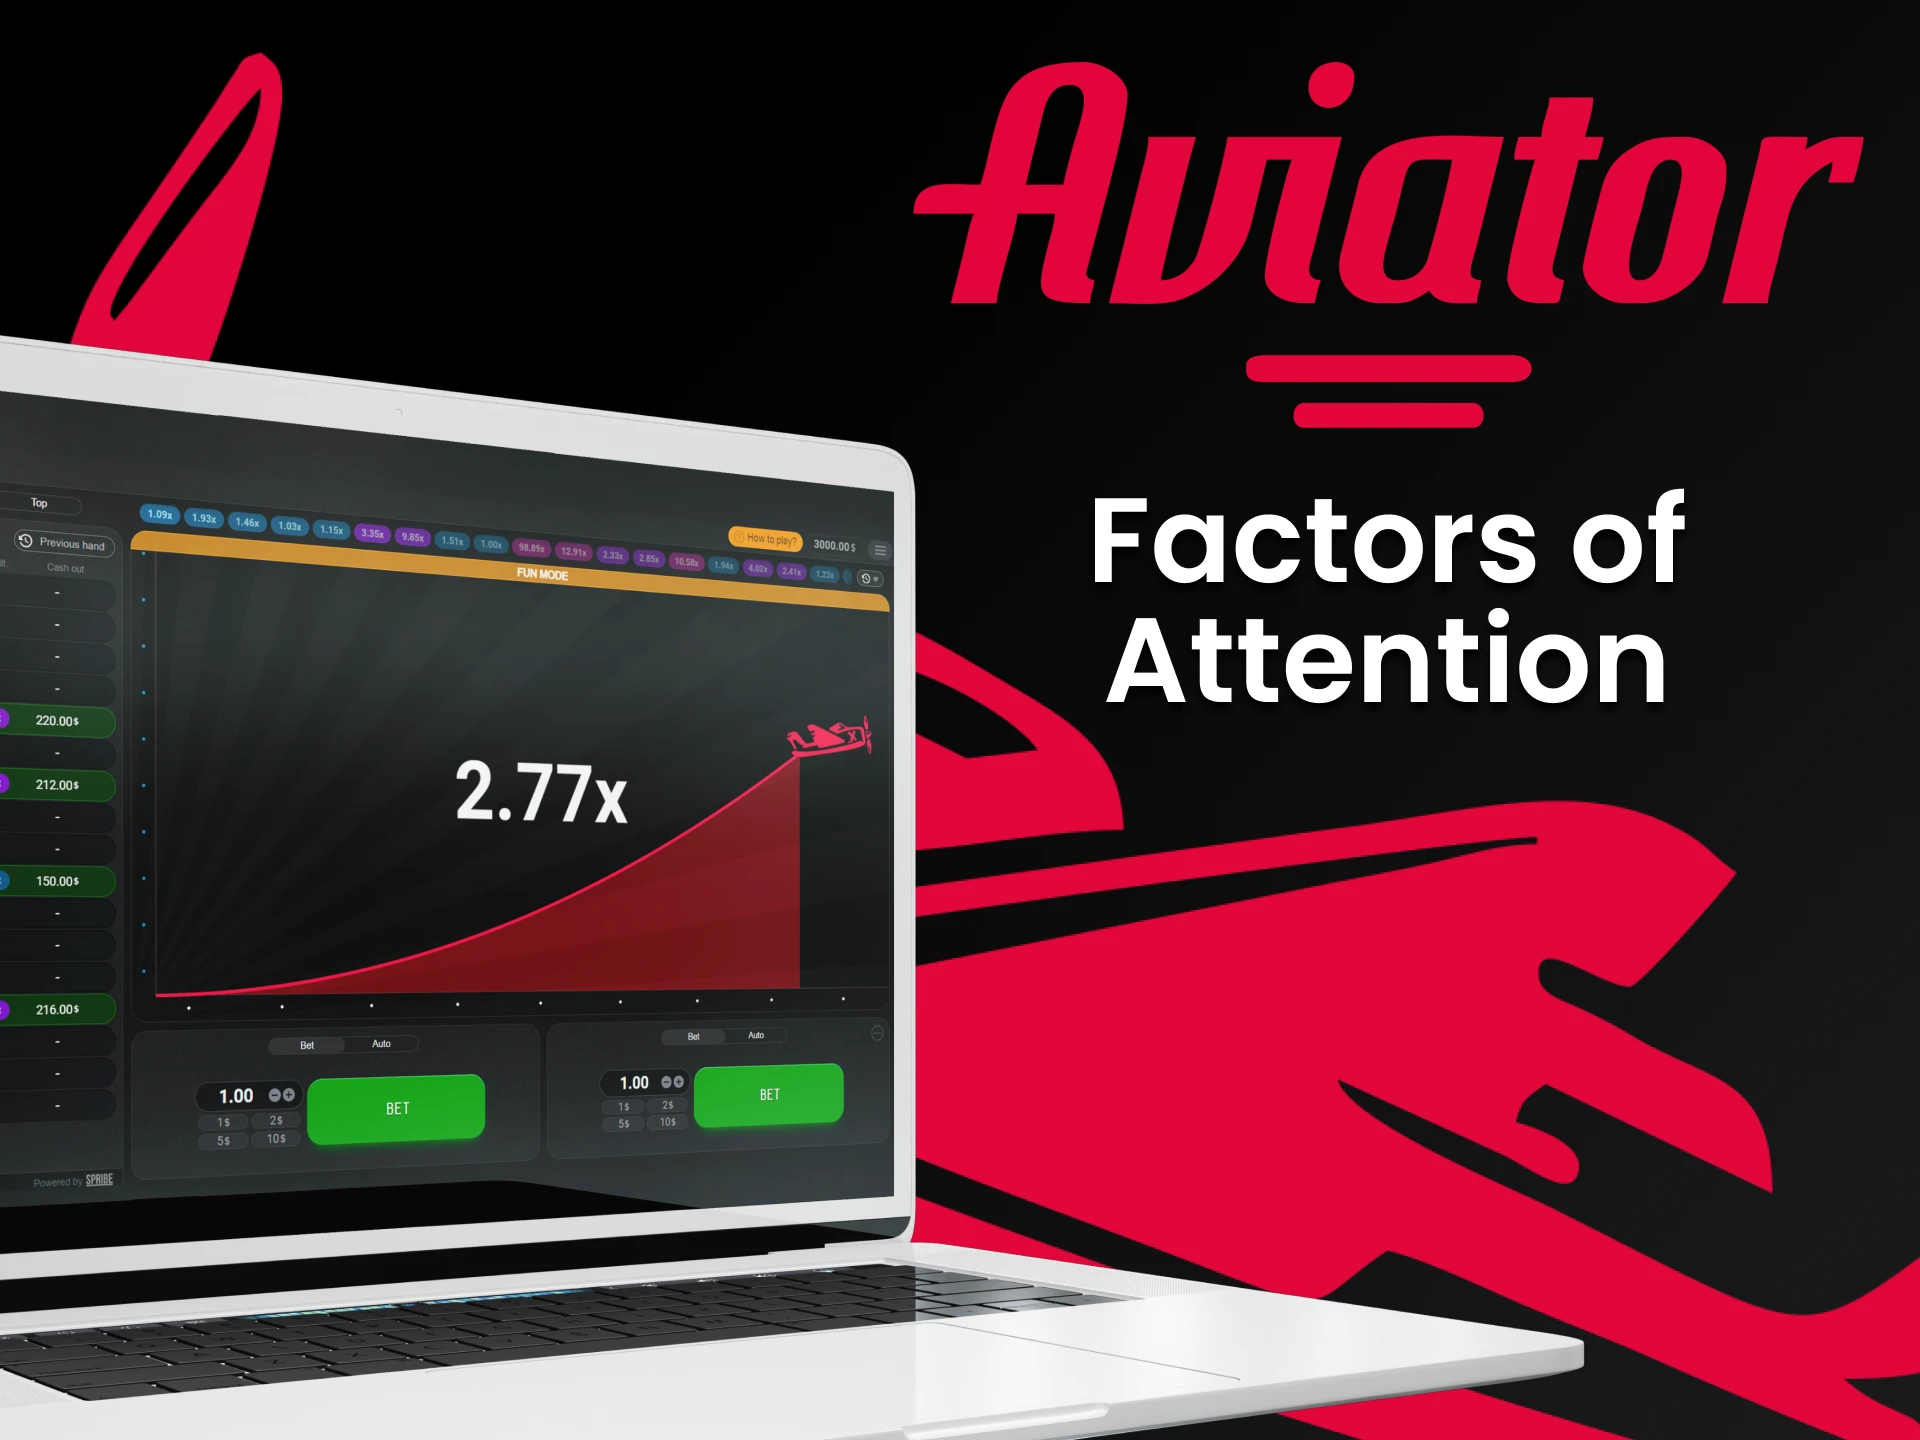 Find out what you should pay attention to in the Aviator game.